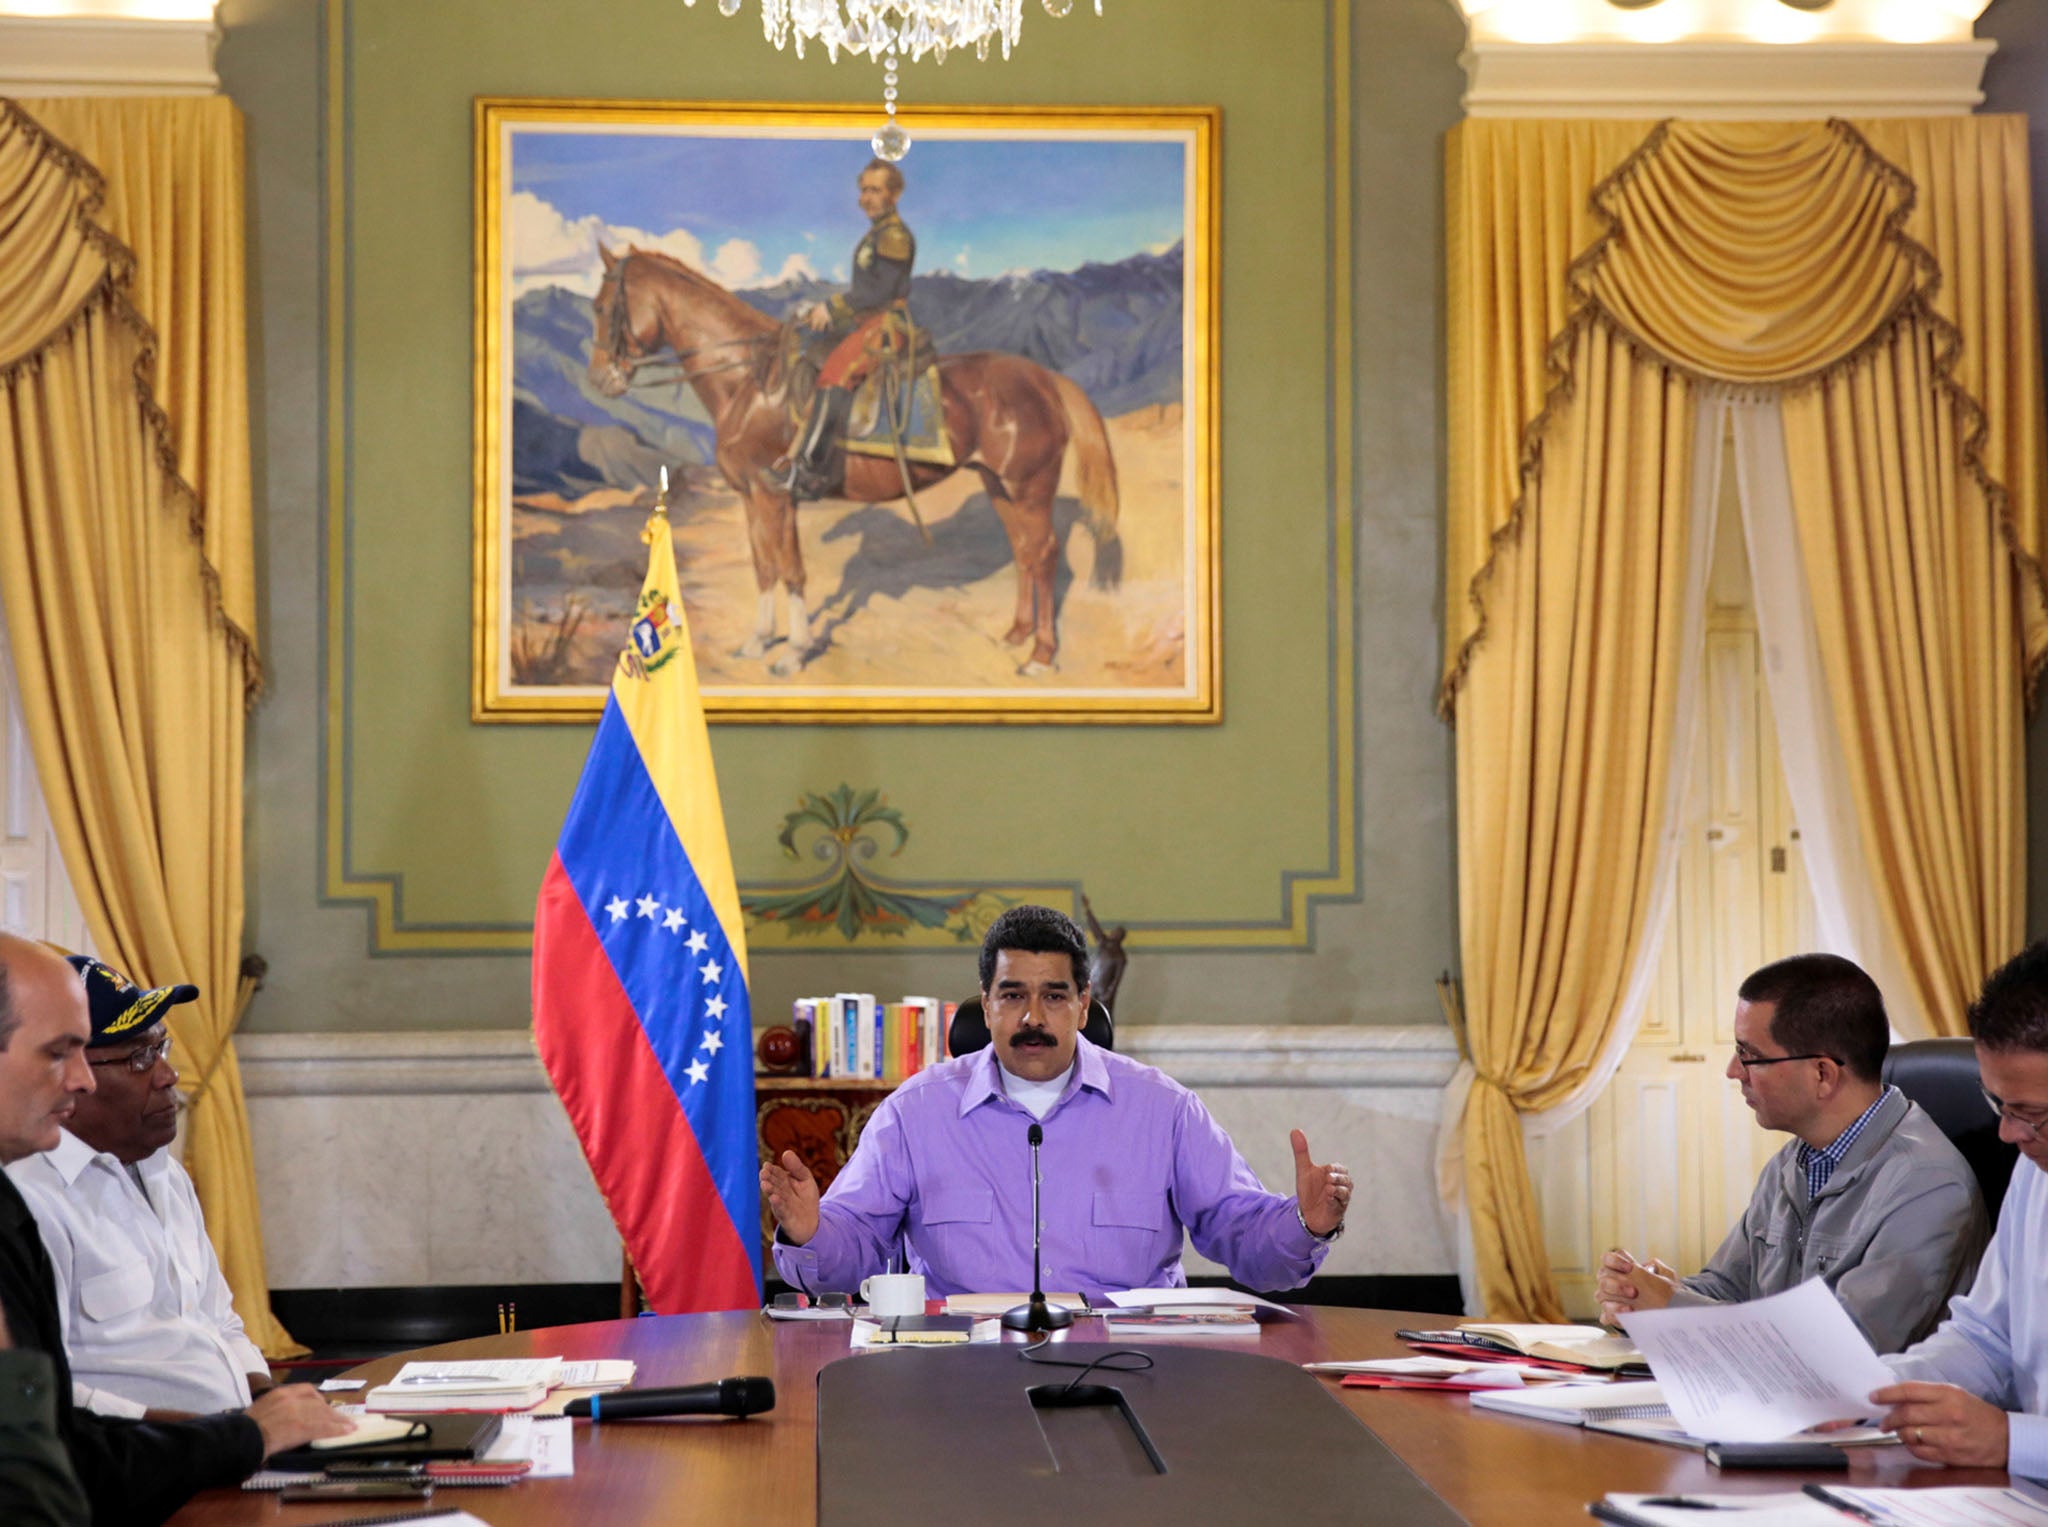 Venezuela's President Nicolas Maduro (C) speaks during a meeting with ministers at Miraflores Palace in Caracas